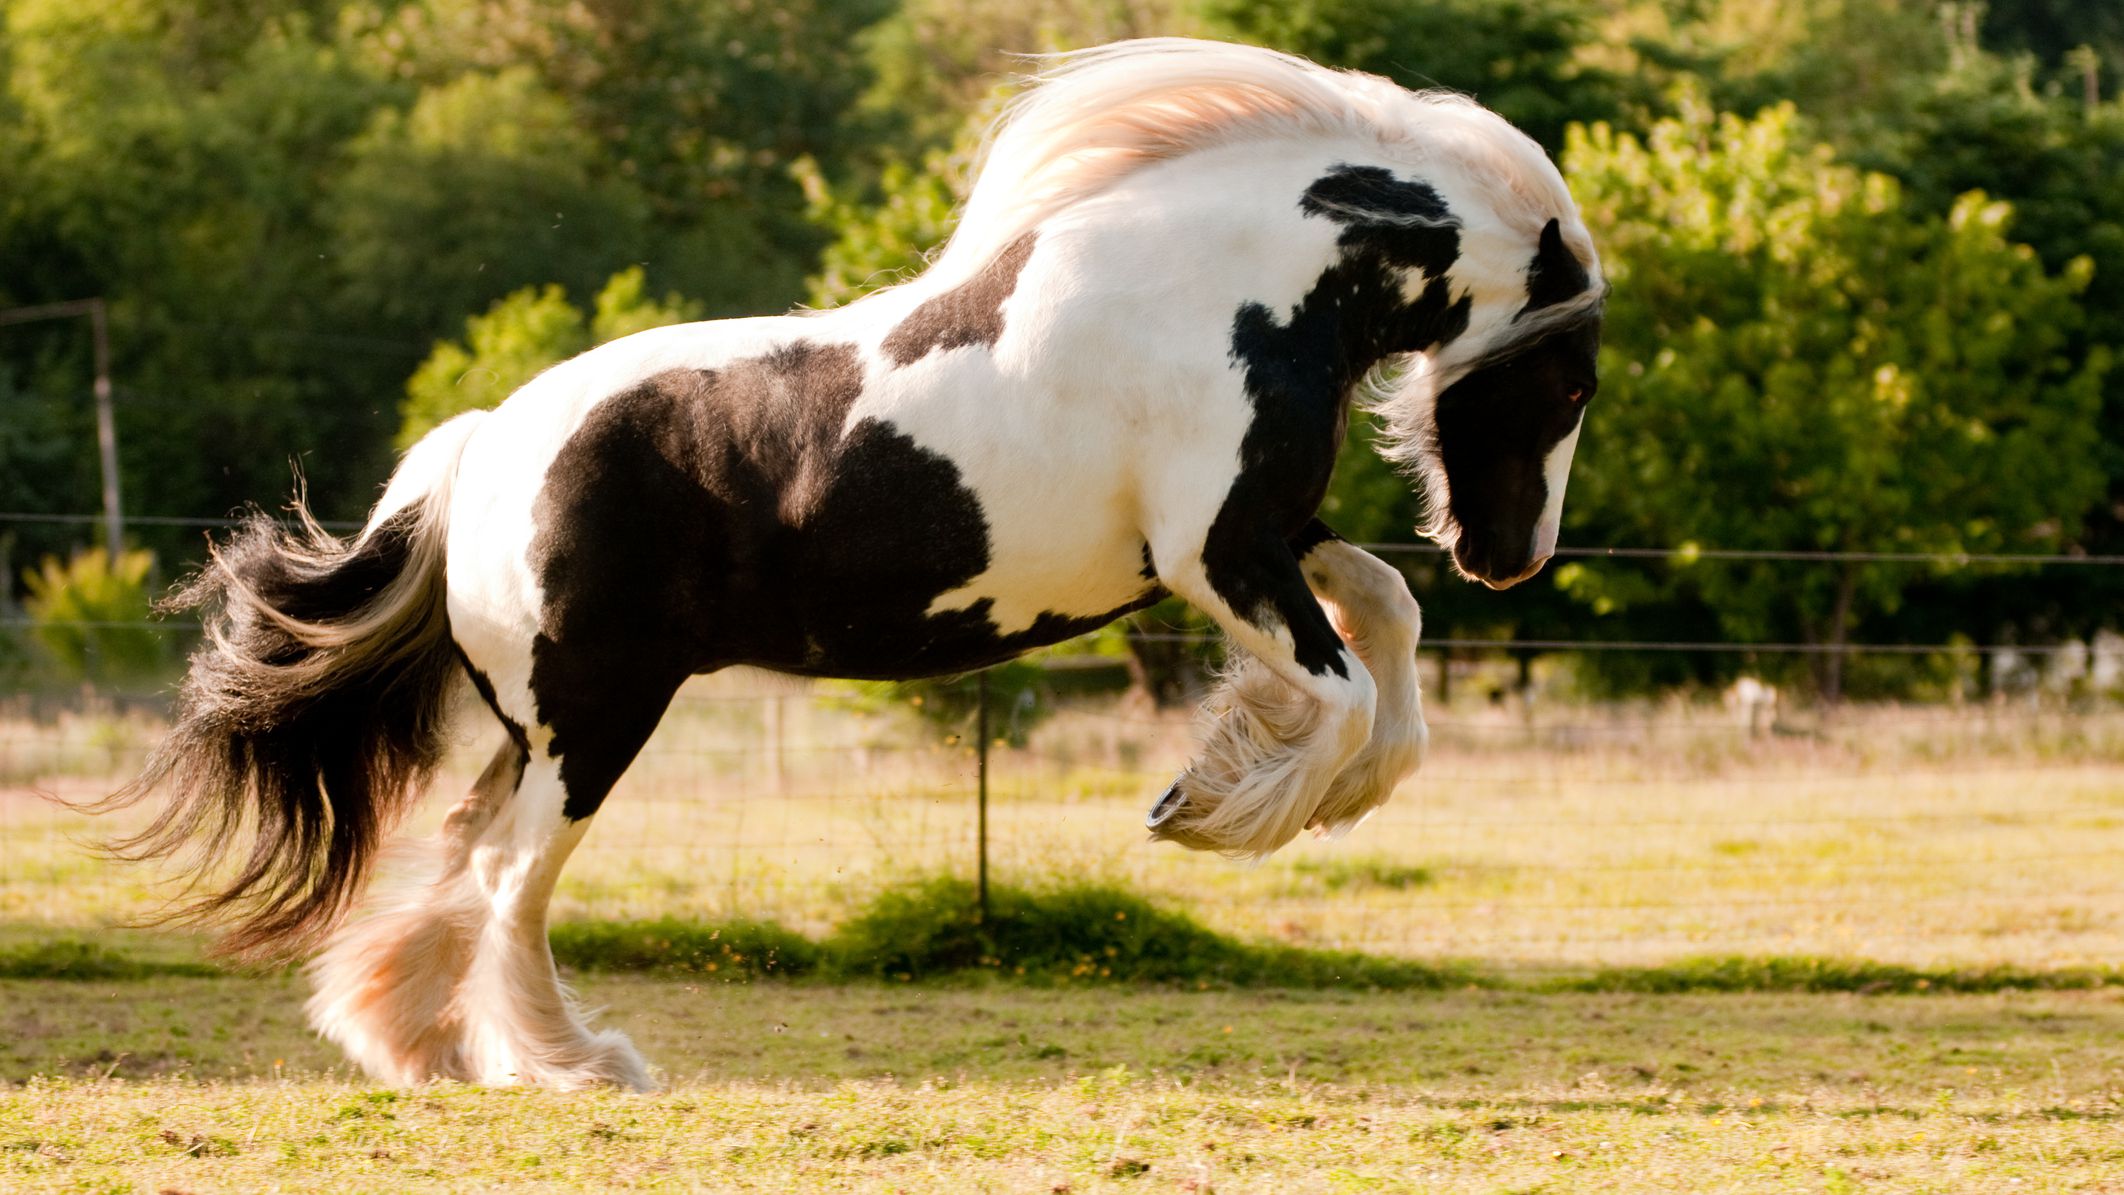 10 Most Expensive Horse Breeds in the World